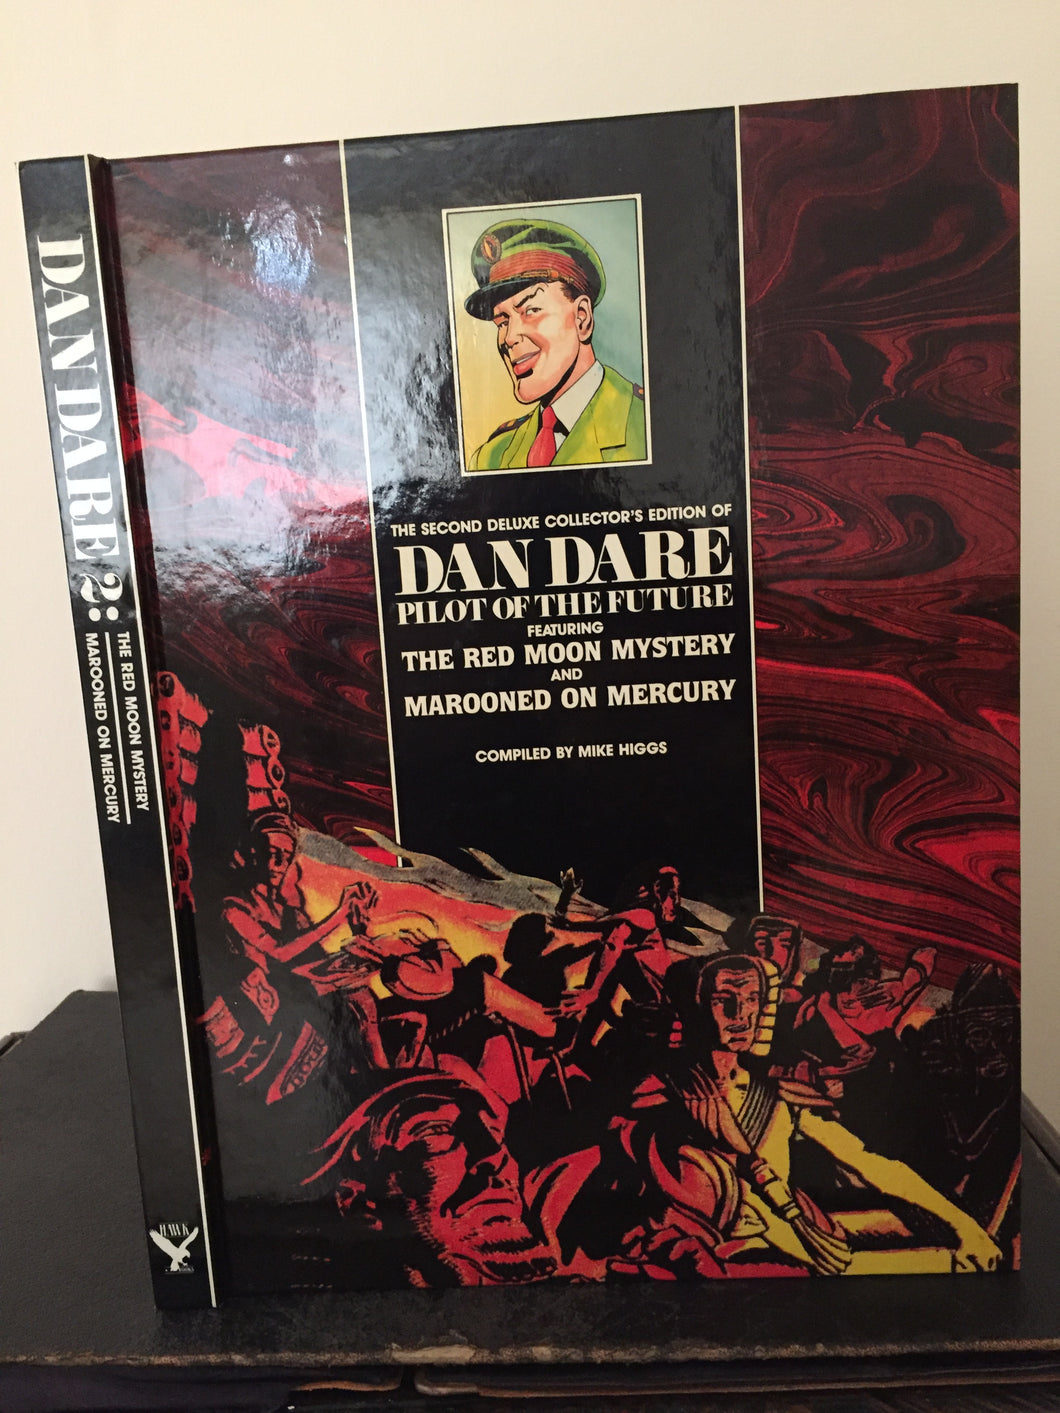 The Second Deluxe Collectors Edition of Dan Dare - Pilot of the Future featuring The Red Moon Mystery and Marooned on Mercury